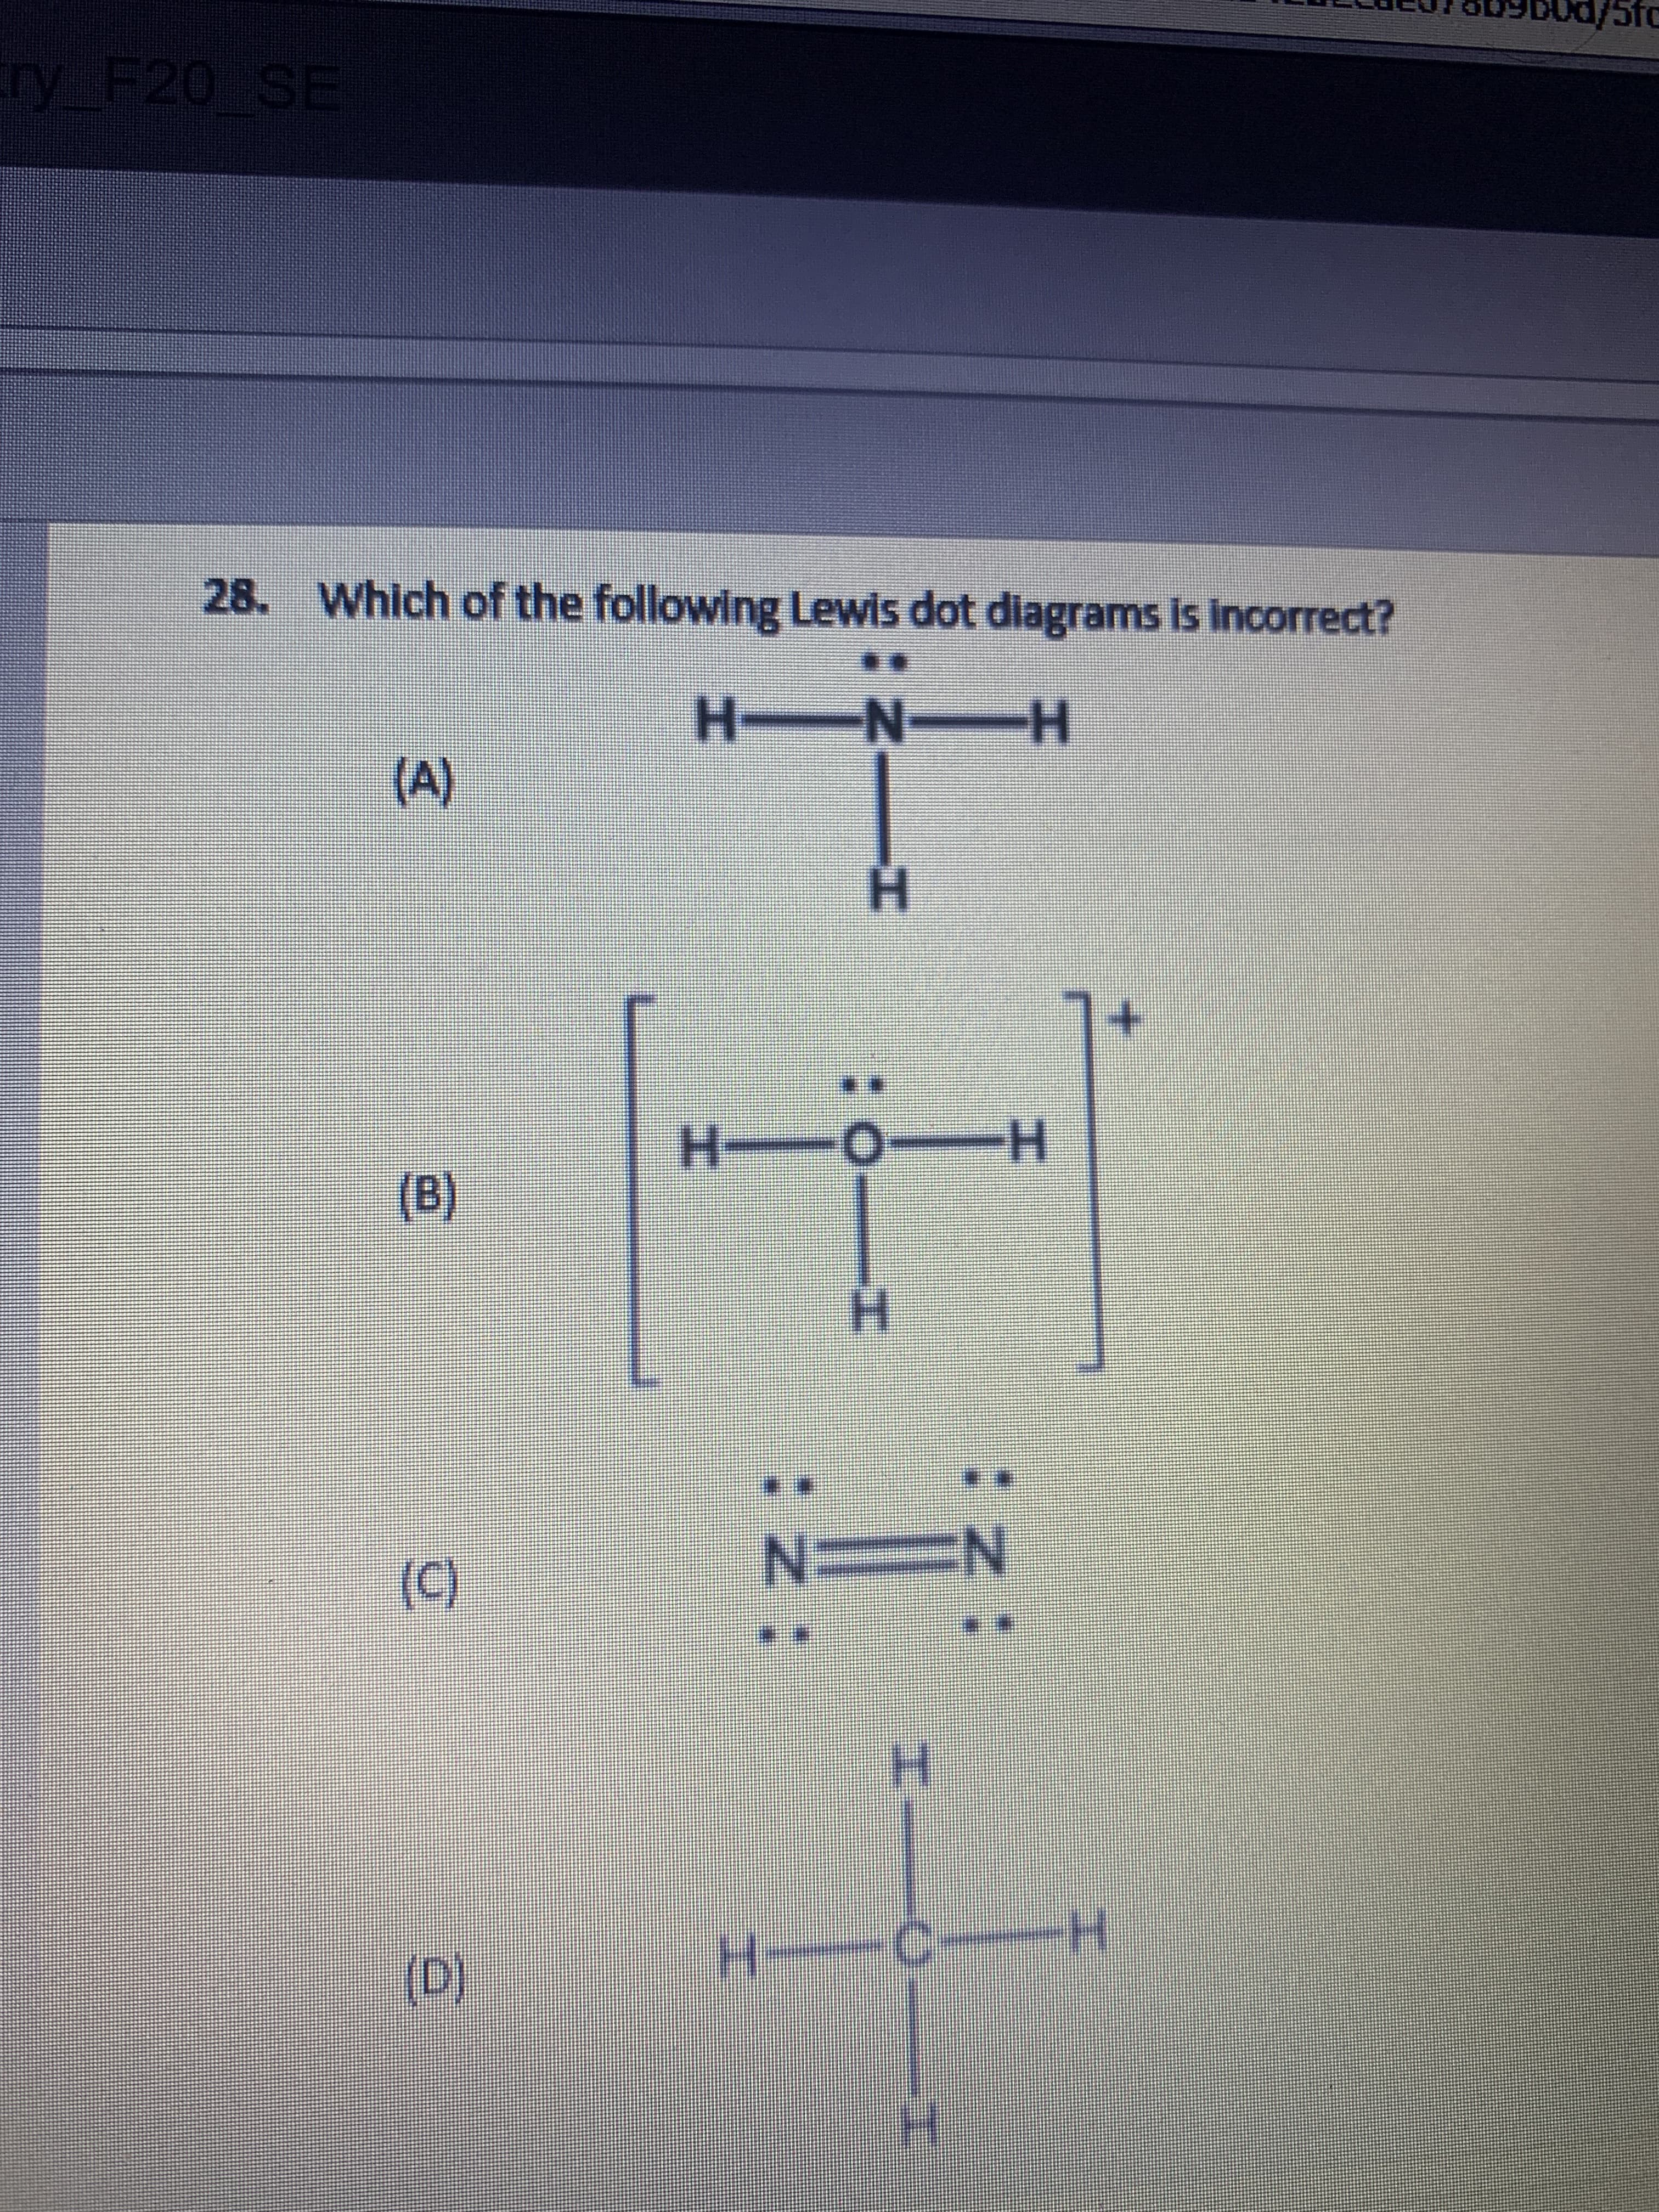 Which of the following Lewis dot diagrams is incorrect?
